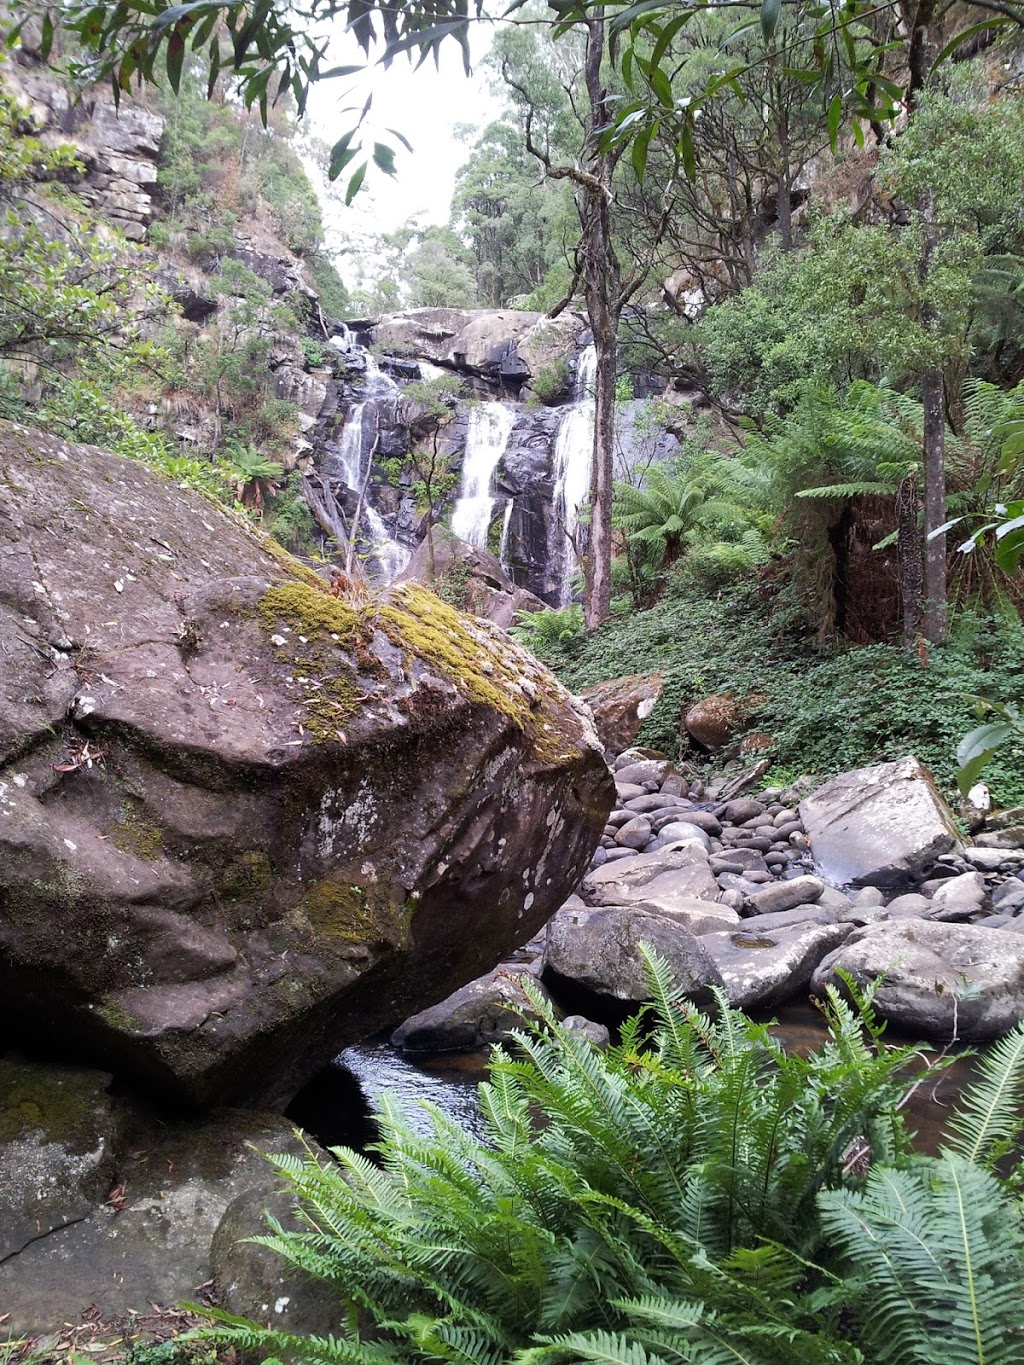 Beauchamp Falls Reserve Camp | campground | Flannagan Rd, Beech Forest VIC 3237, Australia | 131963 OR +61 131963